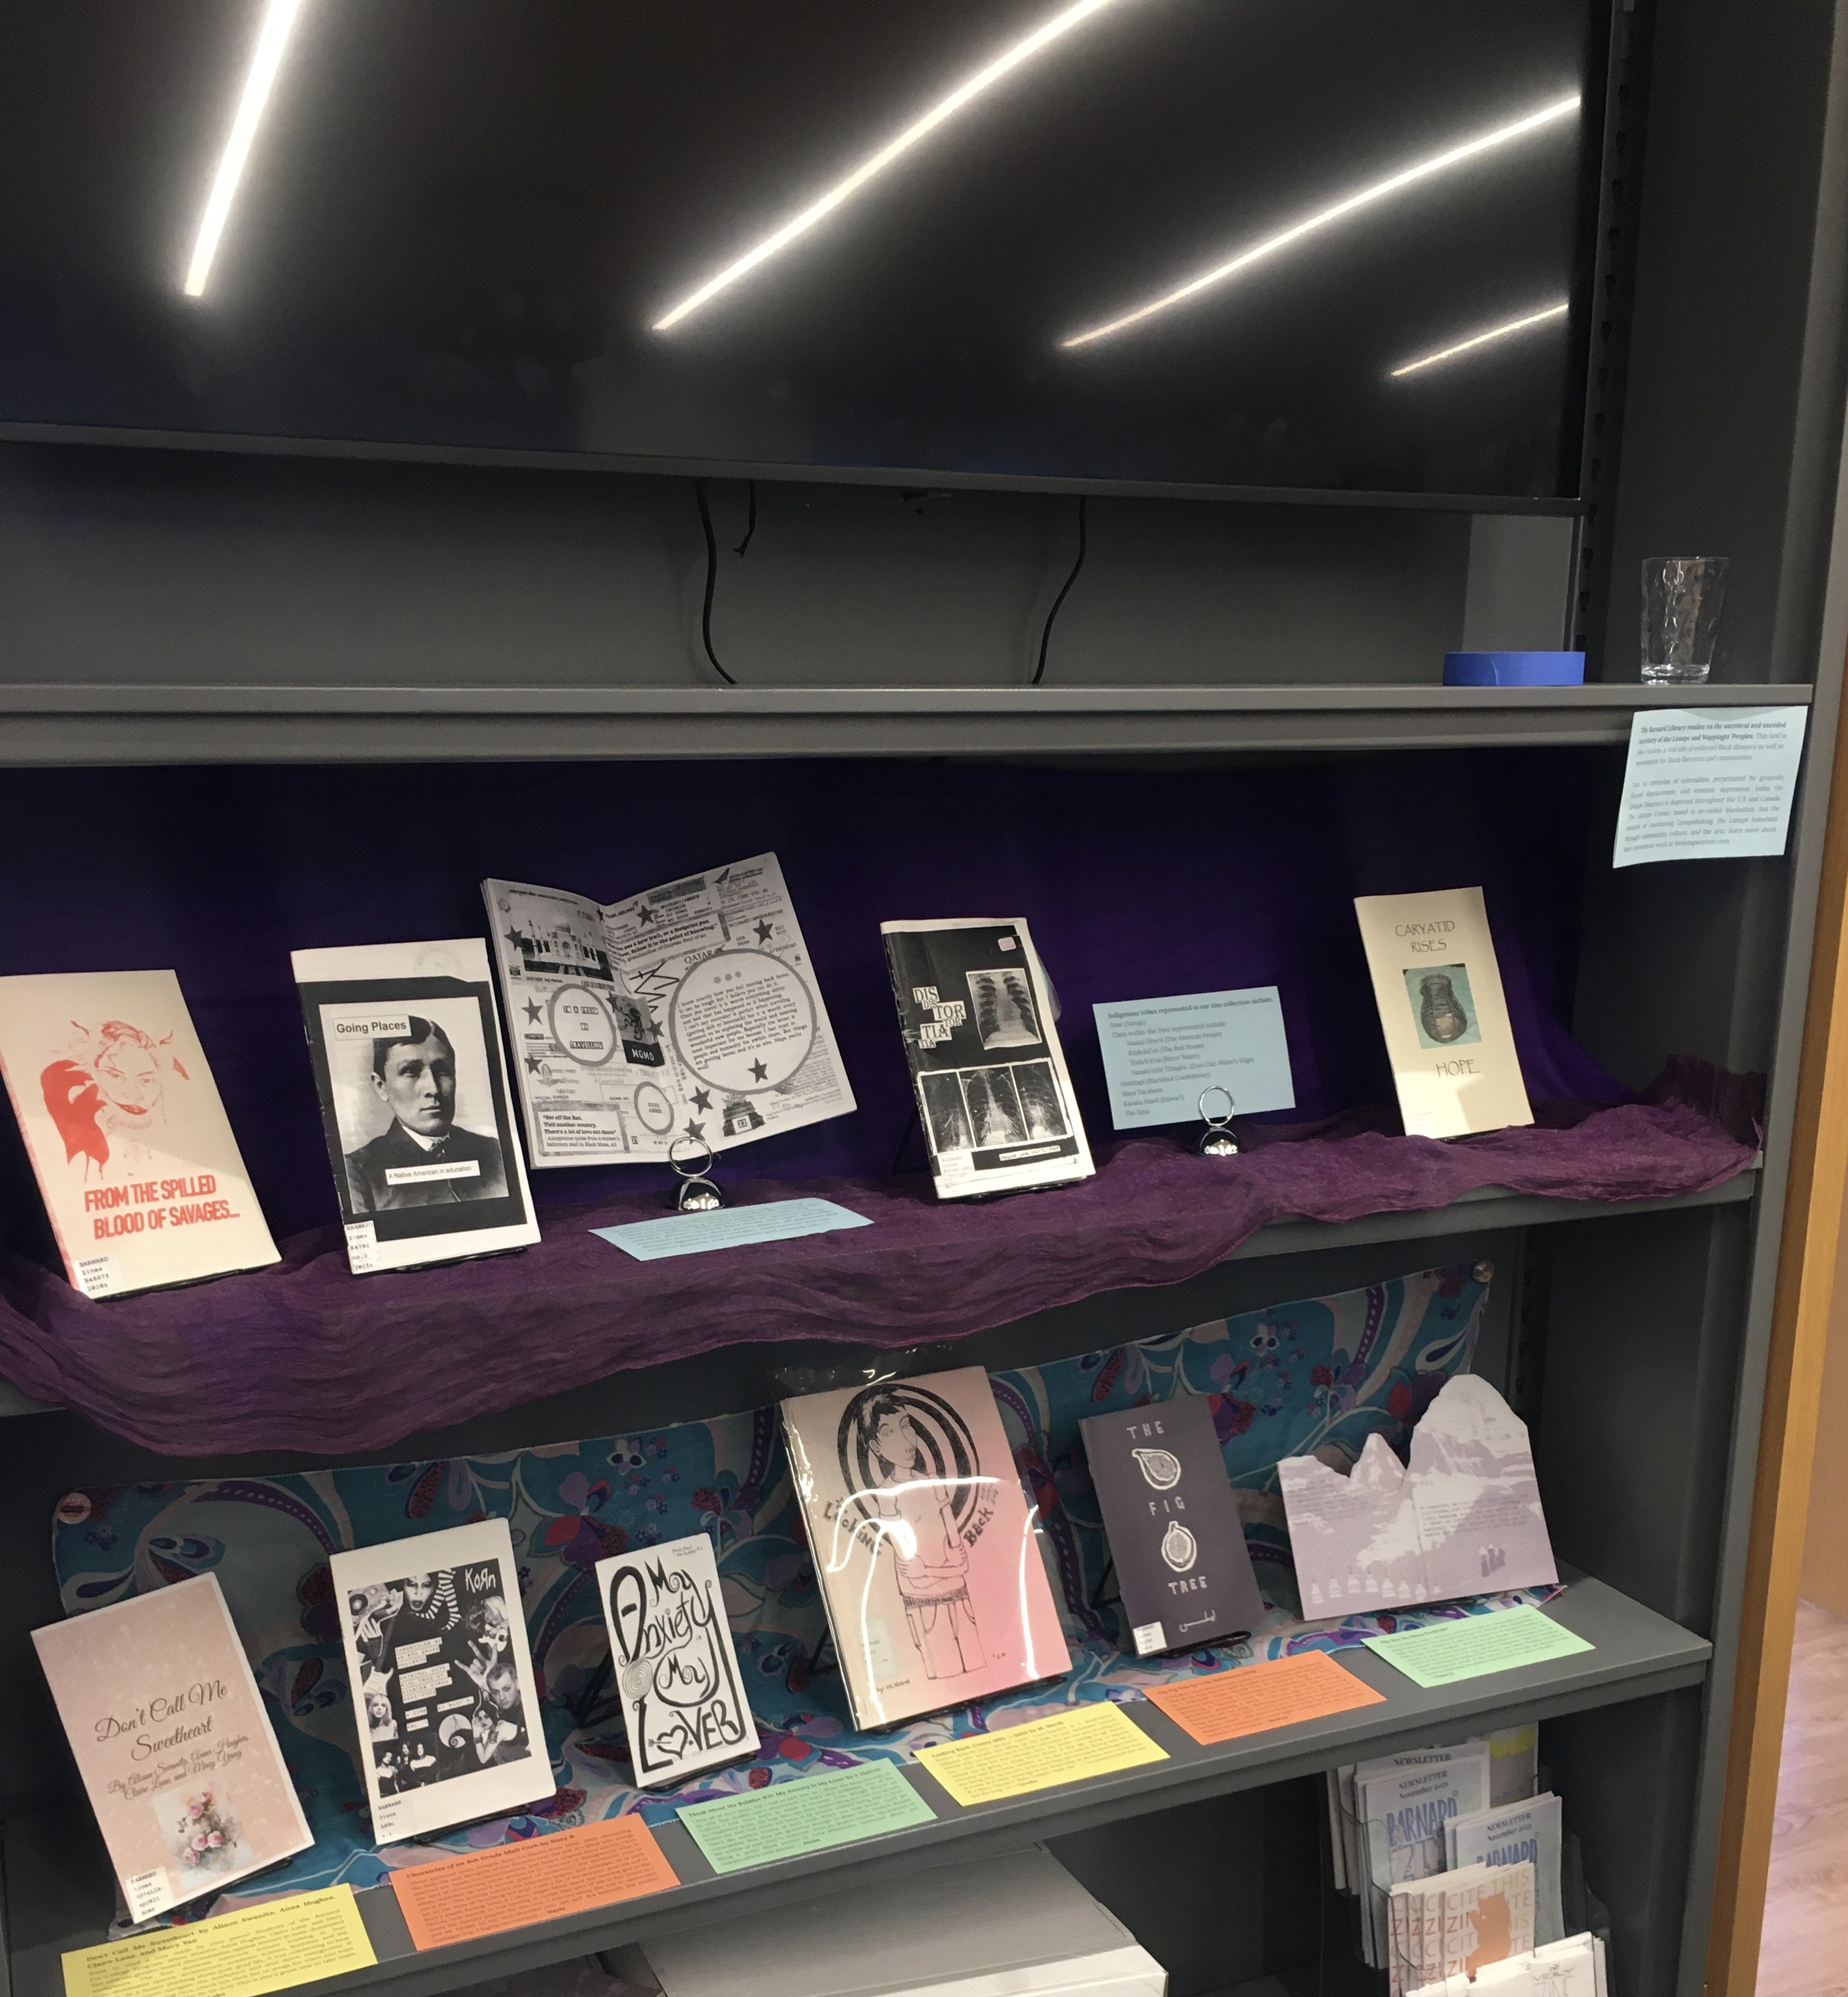 Two display shelves of zines, alongside colorful labels and purple and patterned scarves in the background.